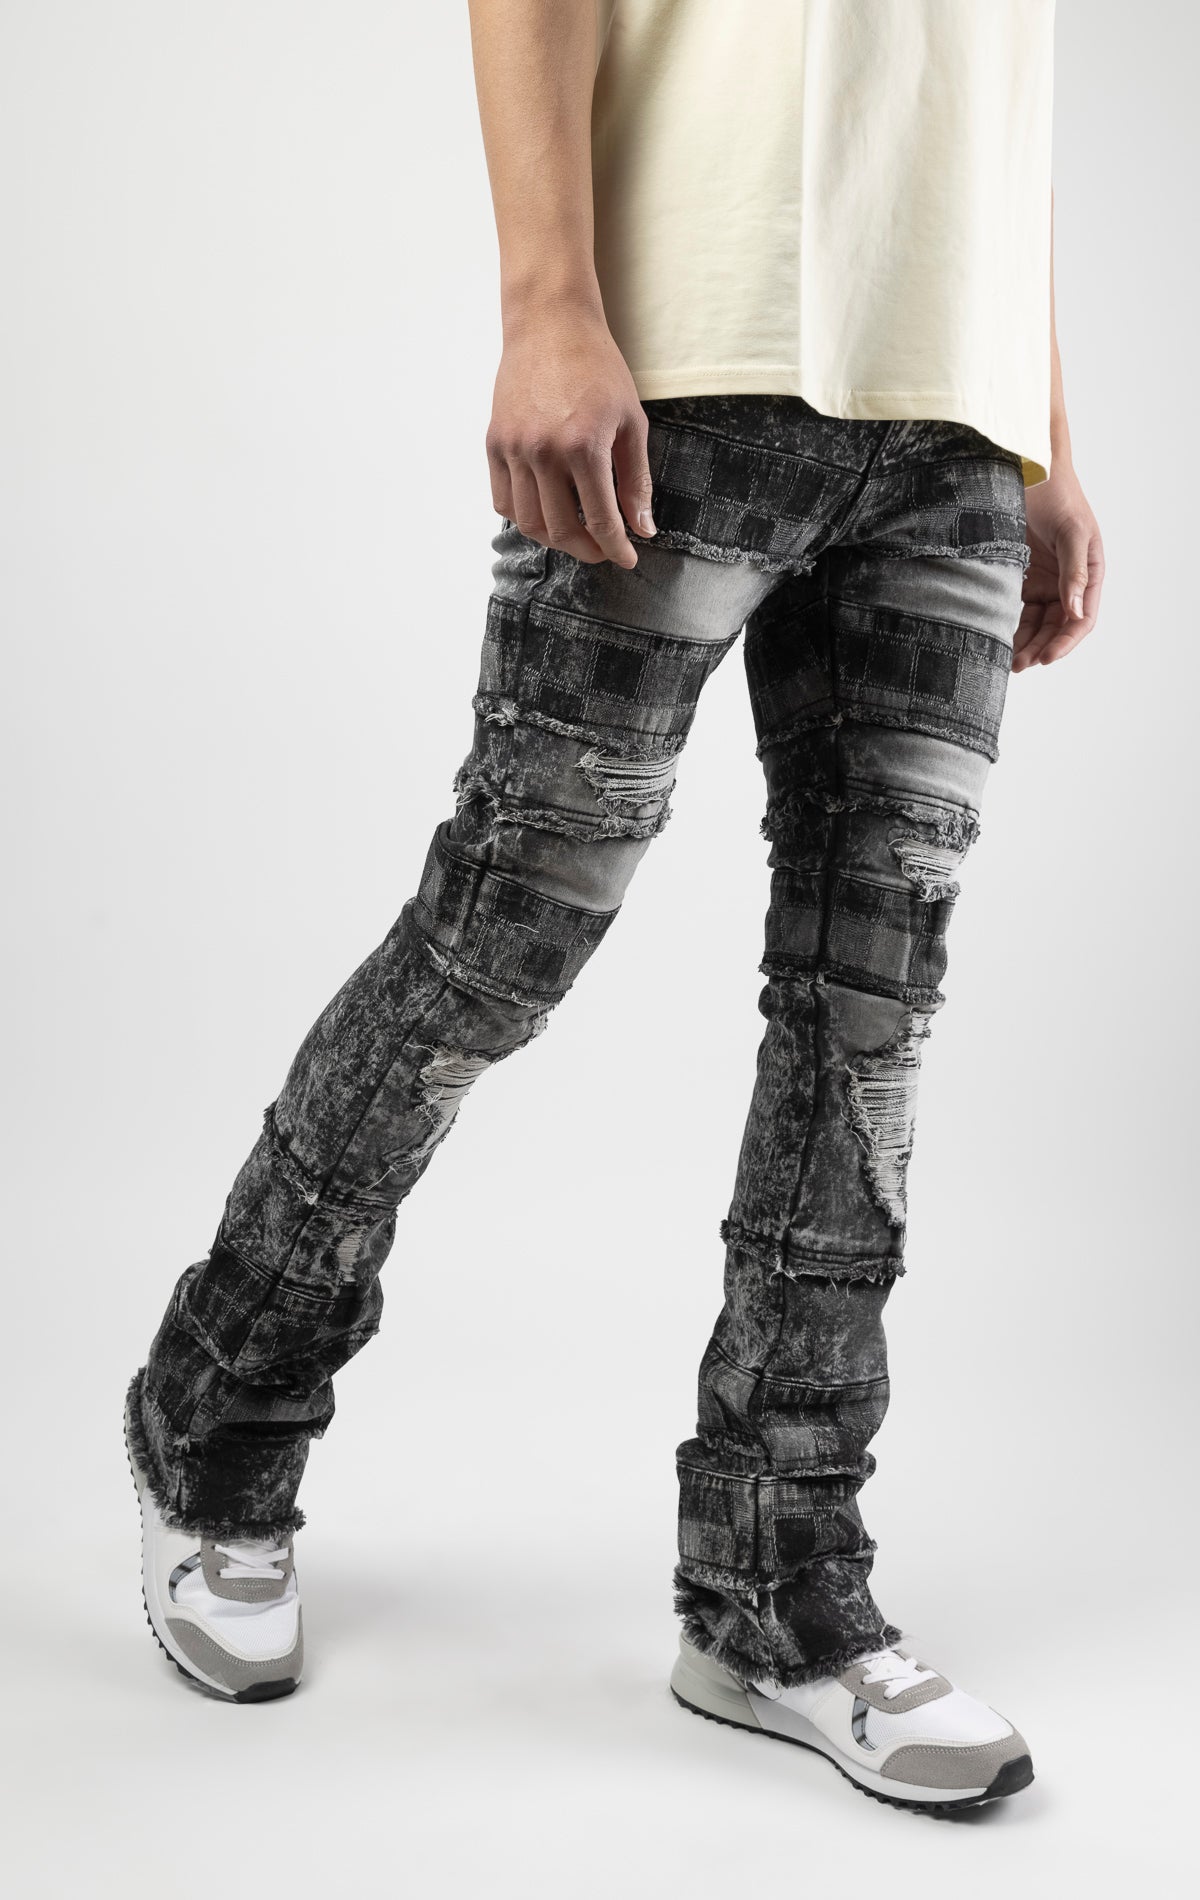 Black wash iconic stacked jeans crafted from high-quality, durable denim fabric consisting of 98% cotton and 2% spandex with a semi flare silhouette and a length of 35